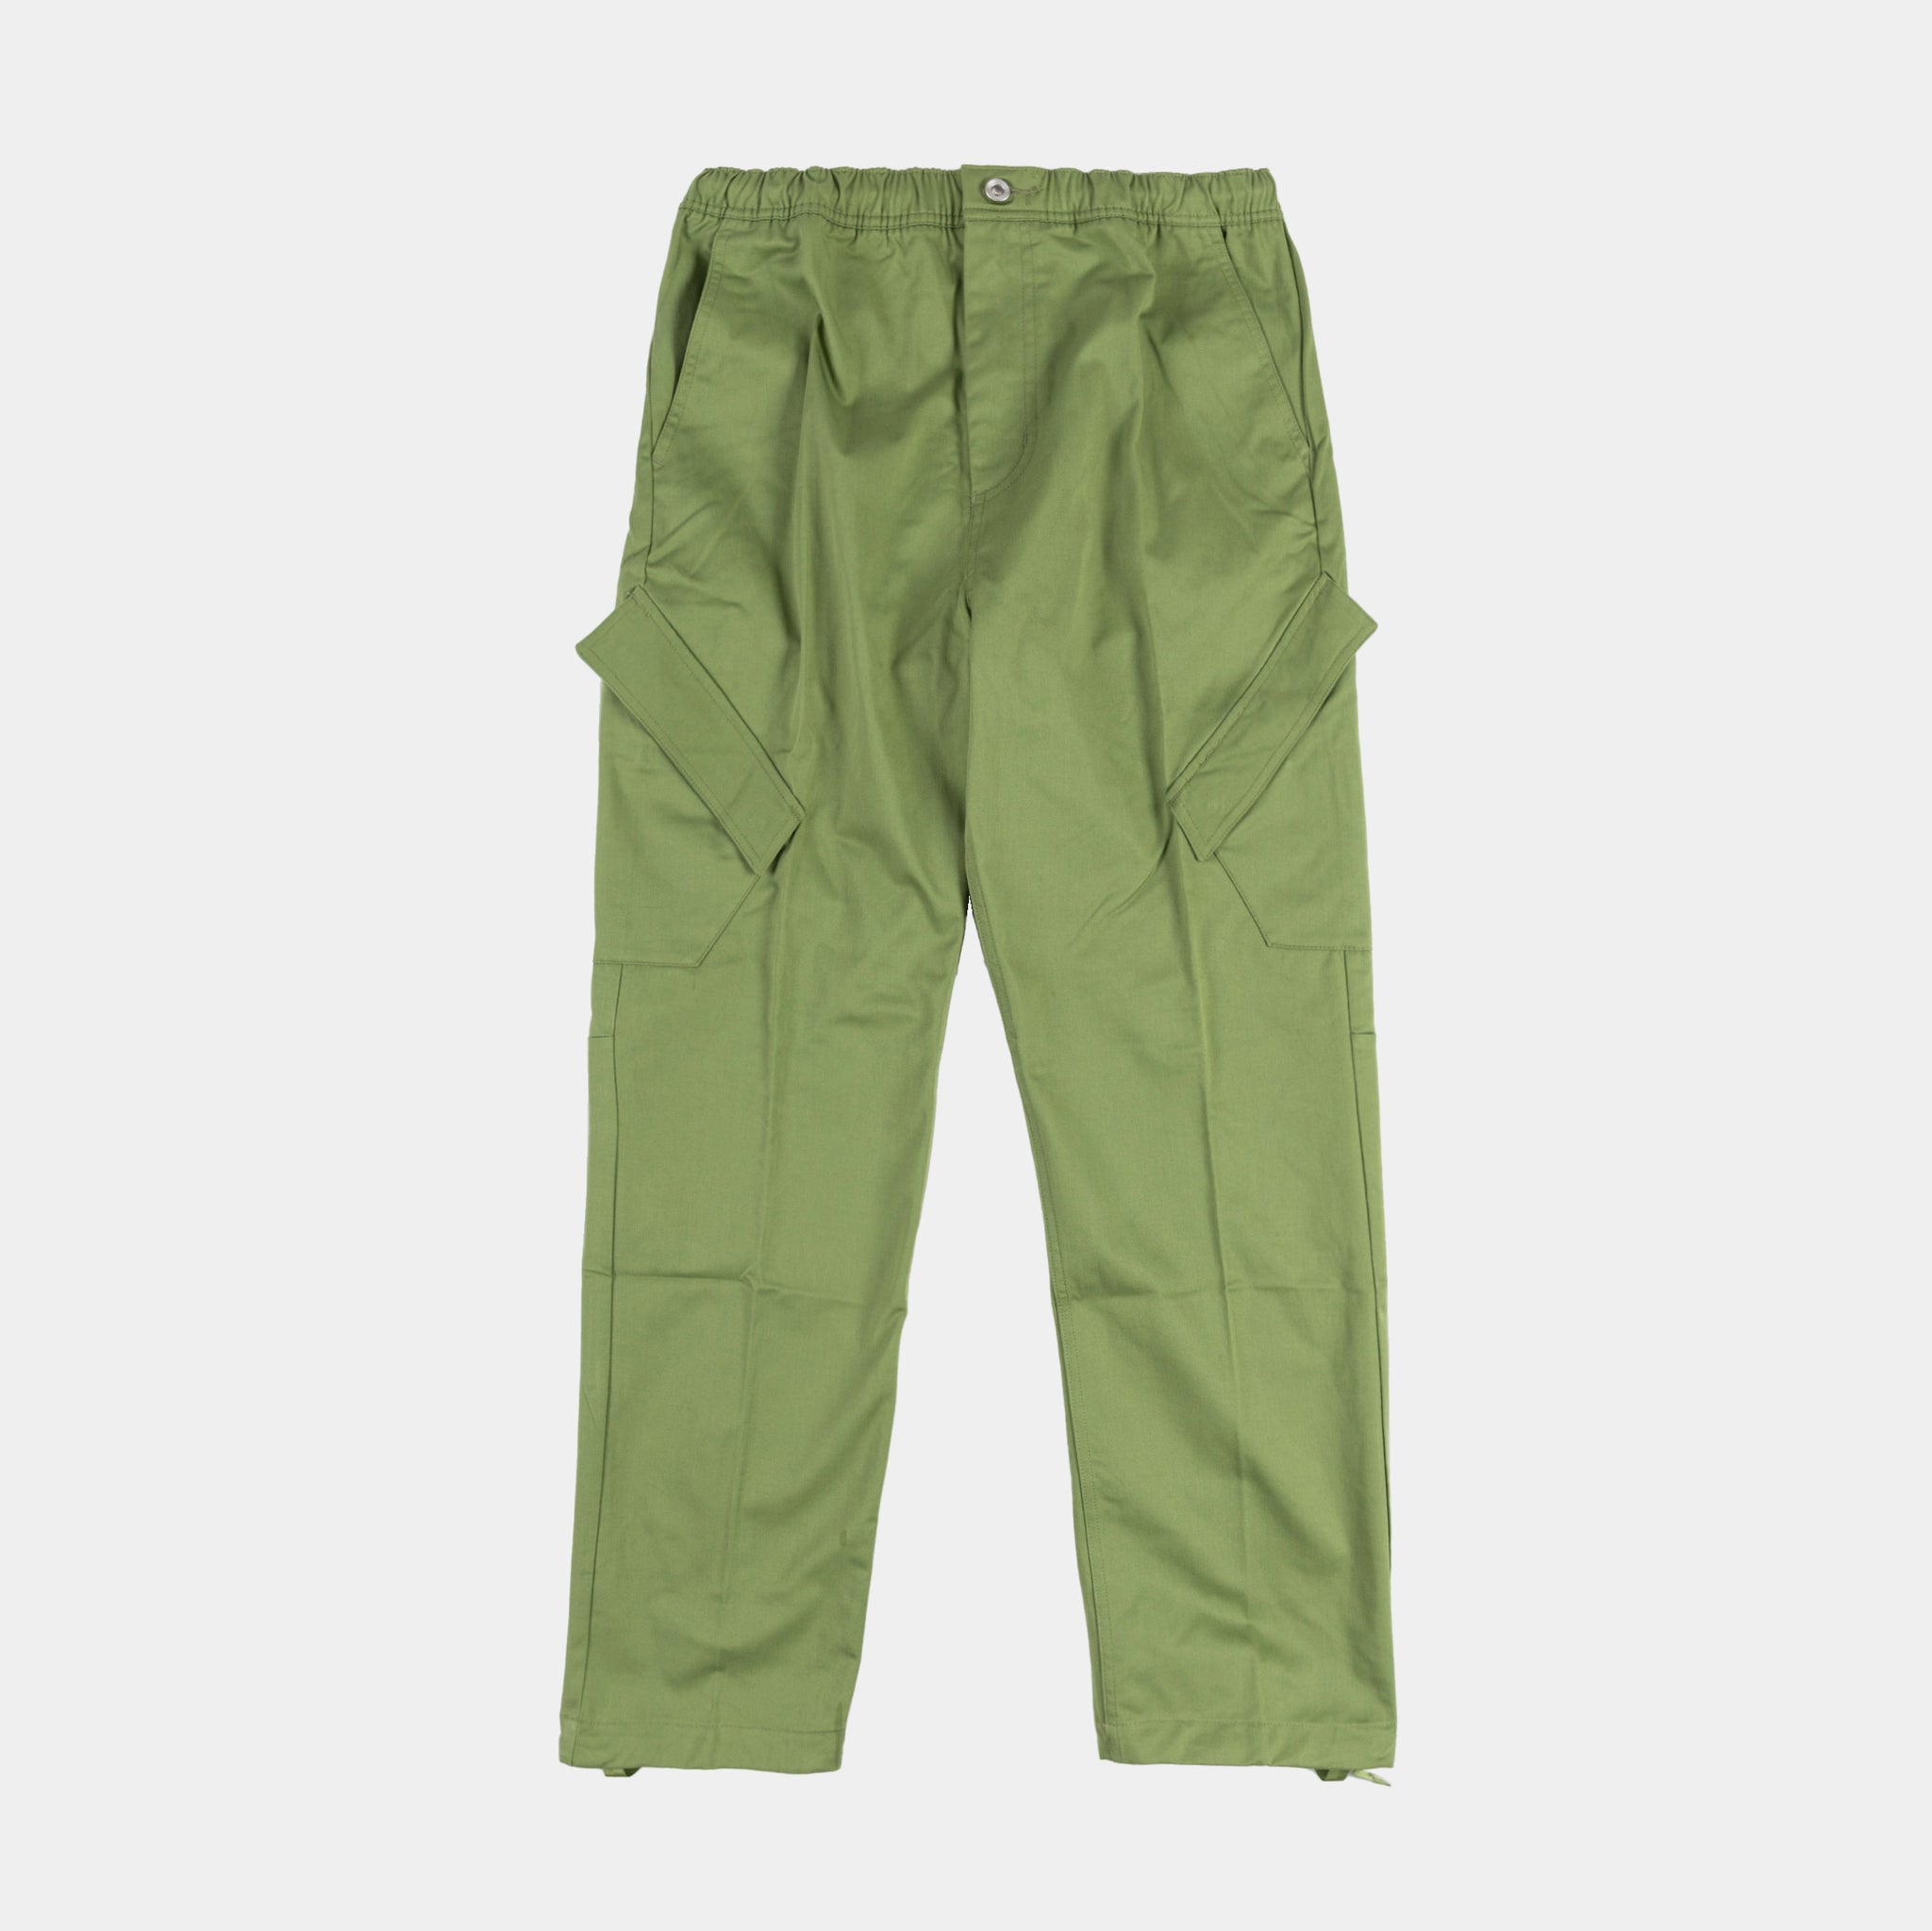 PUMA Men's Essentials Cargo Pants (Available in Big and Tall Sizes)